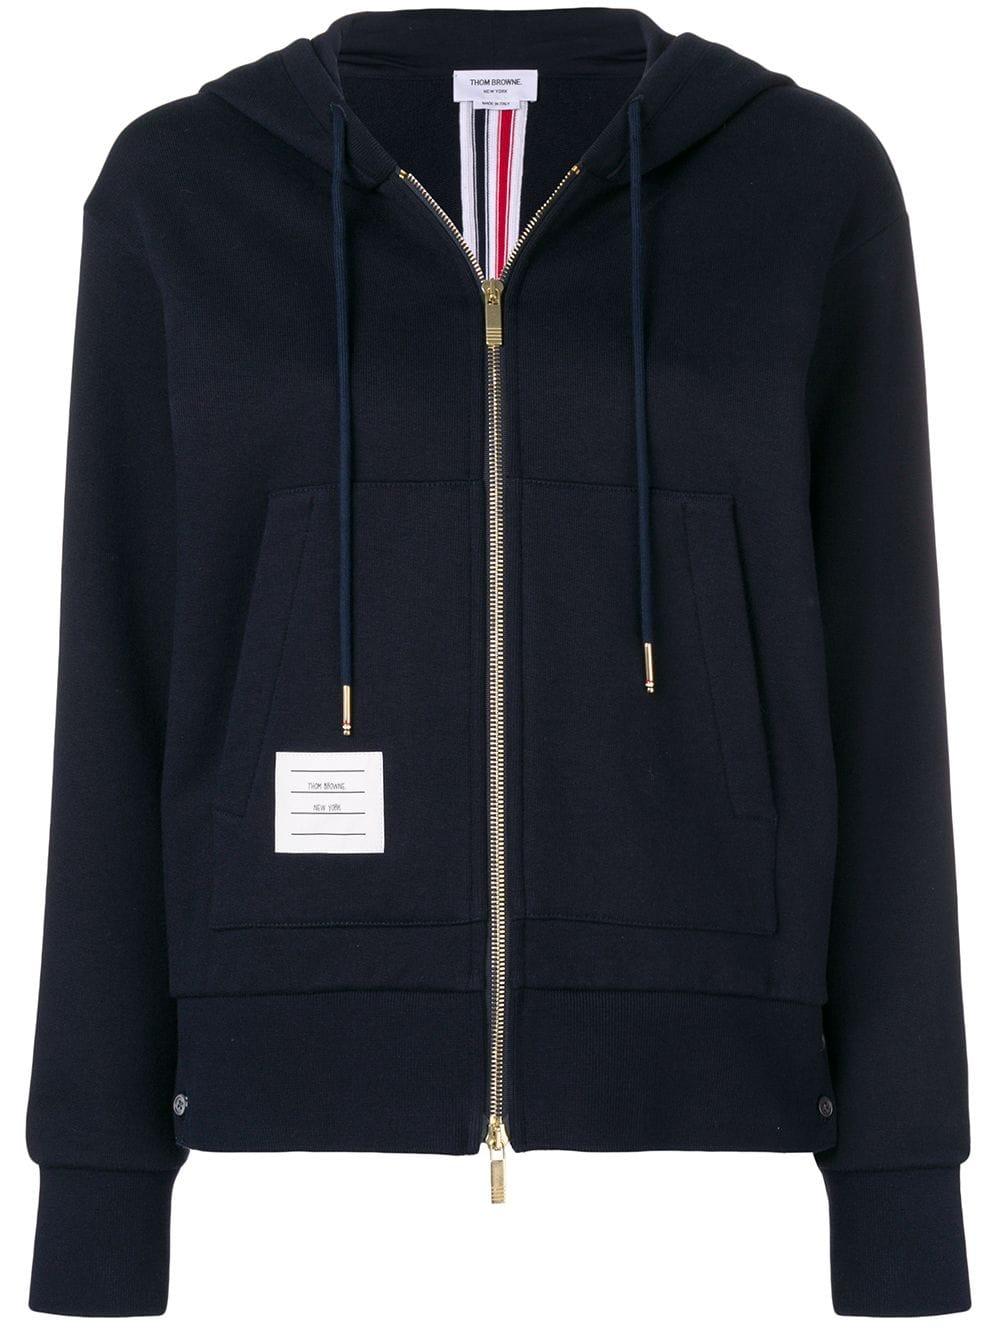 Thom Browne Cotton Center-back Stripe Zip-up Hoodie in Blue - Lyst